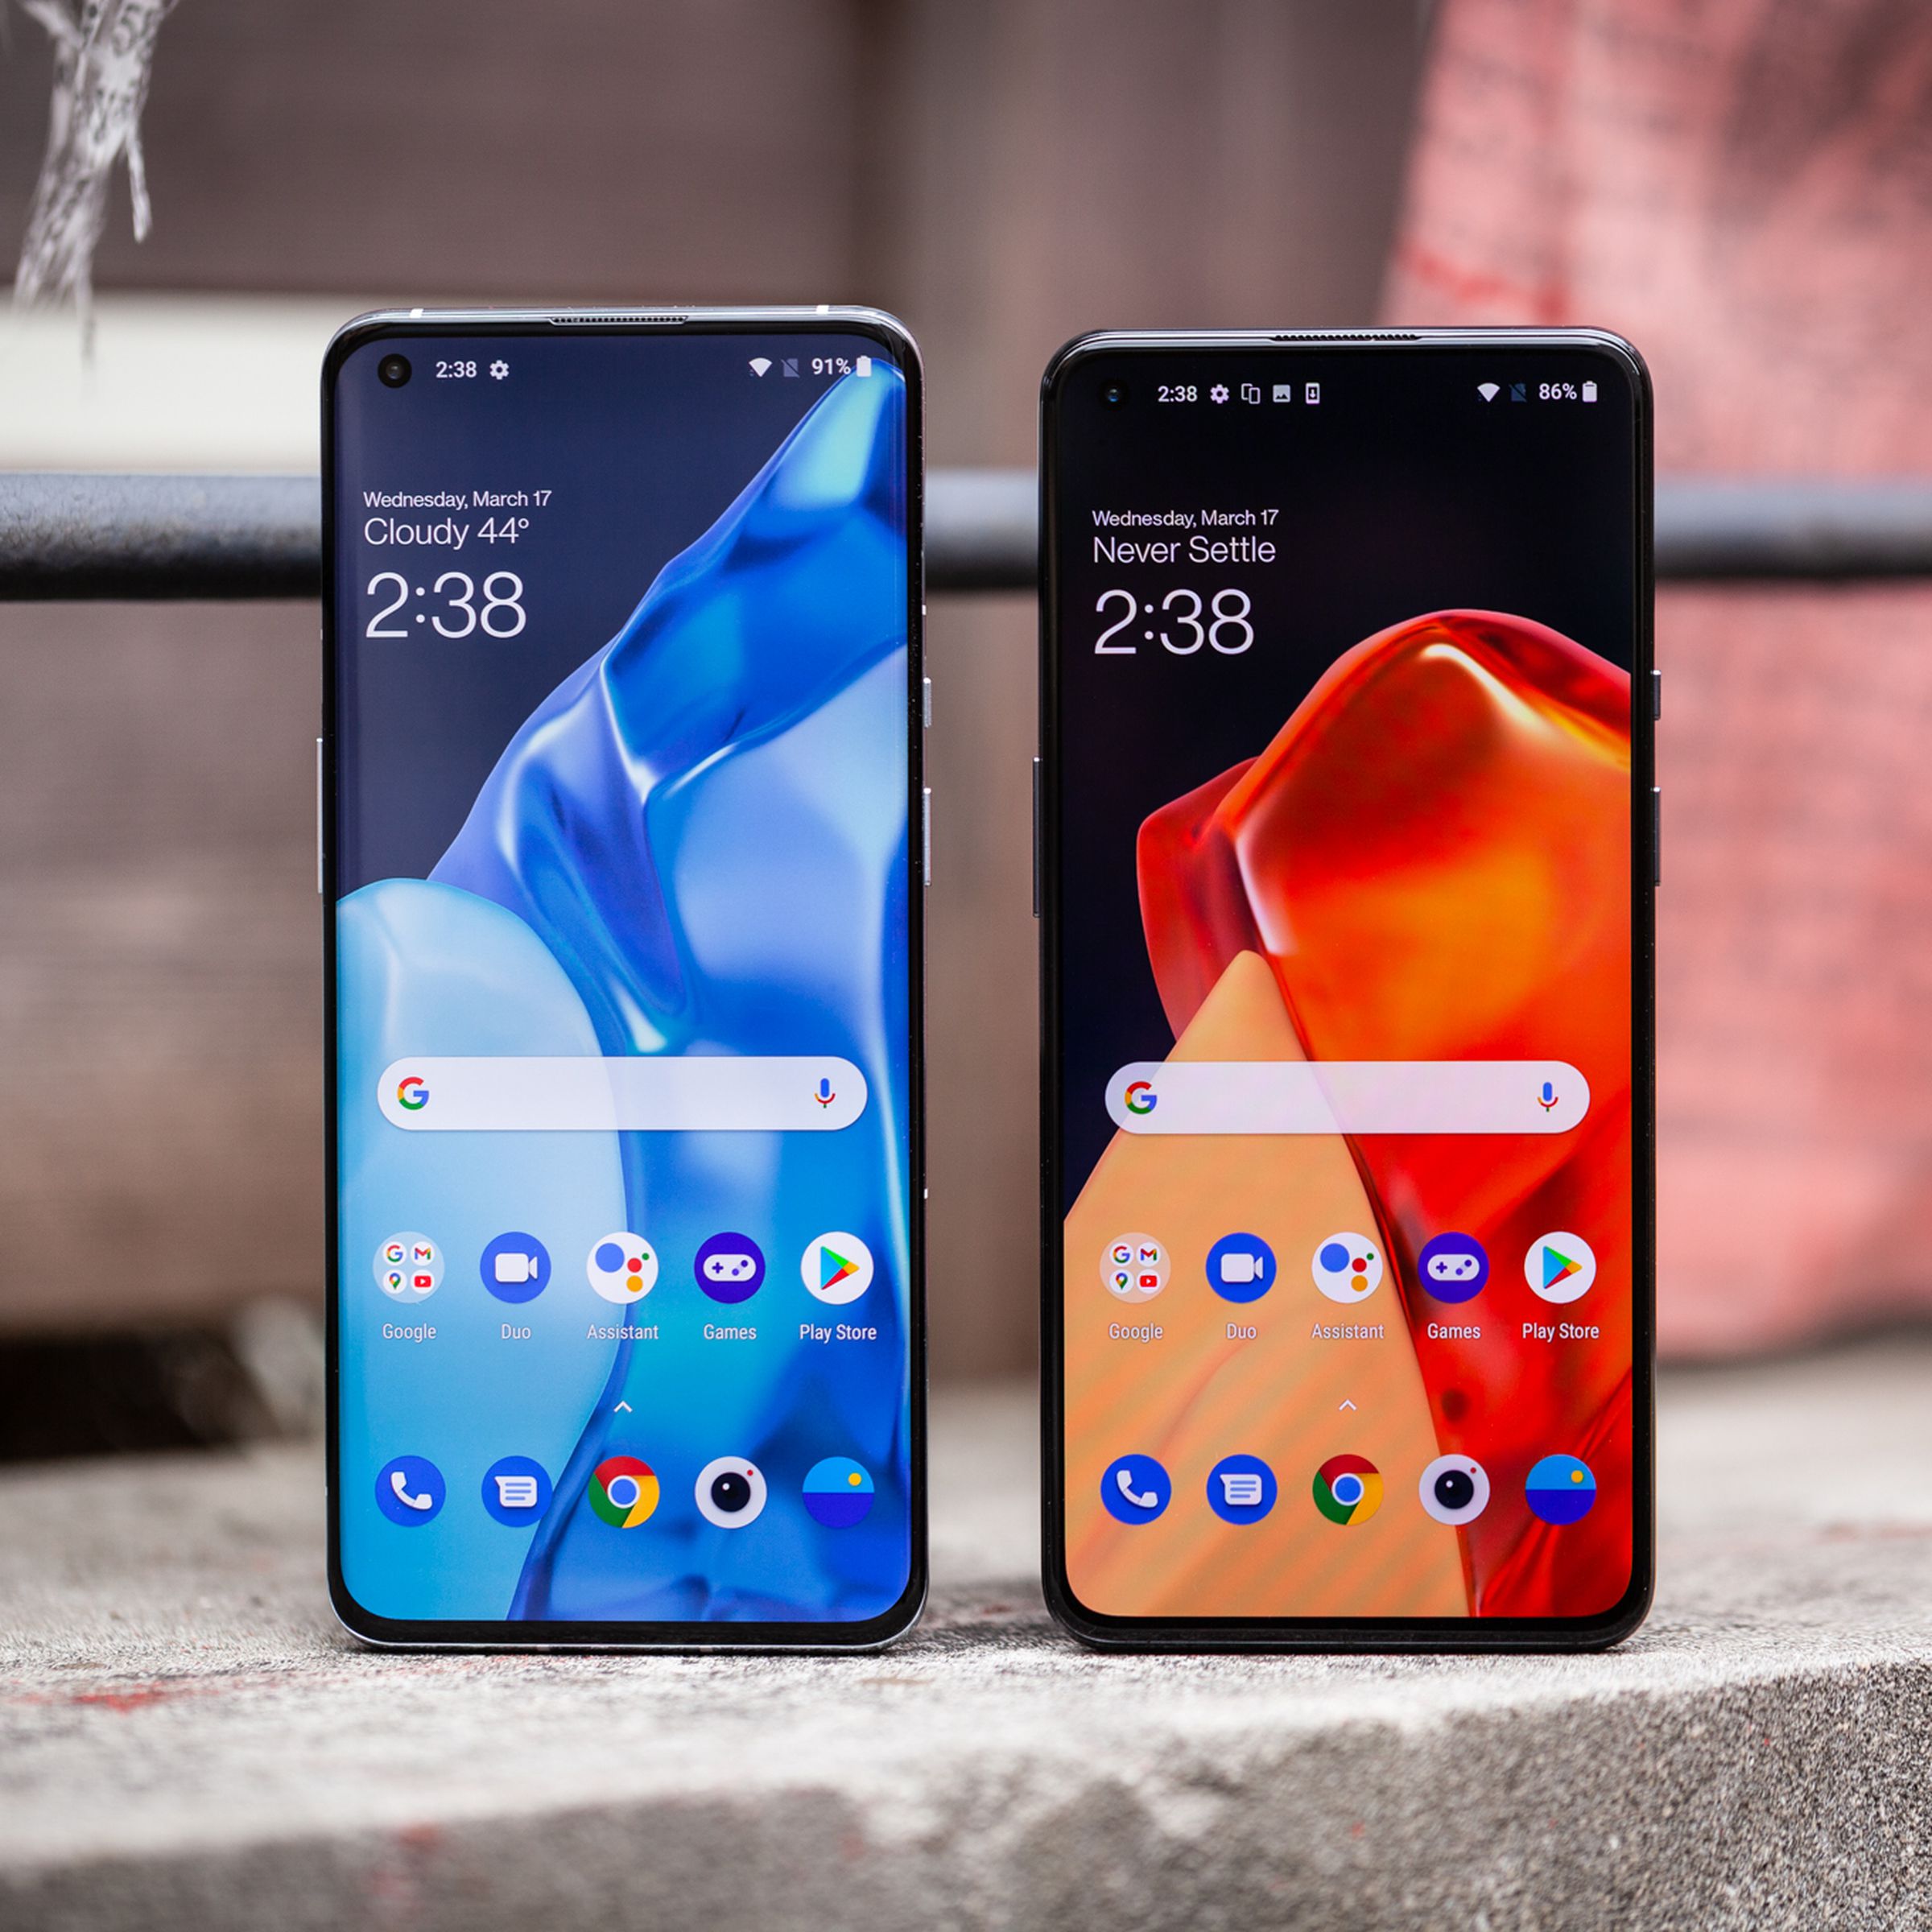 The OnePlus 9 has a slightly smaller screen